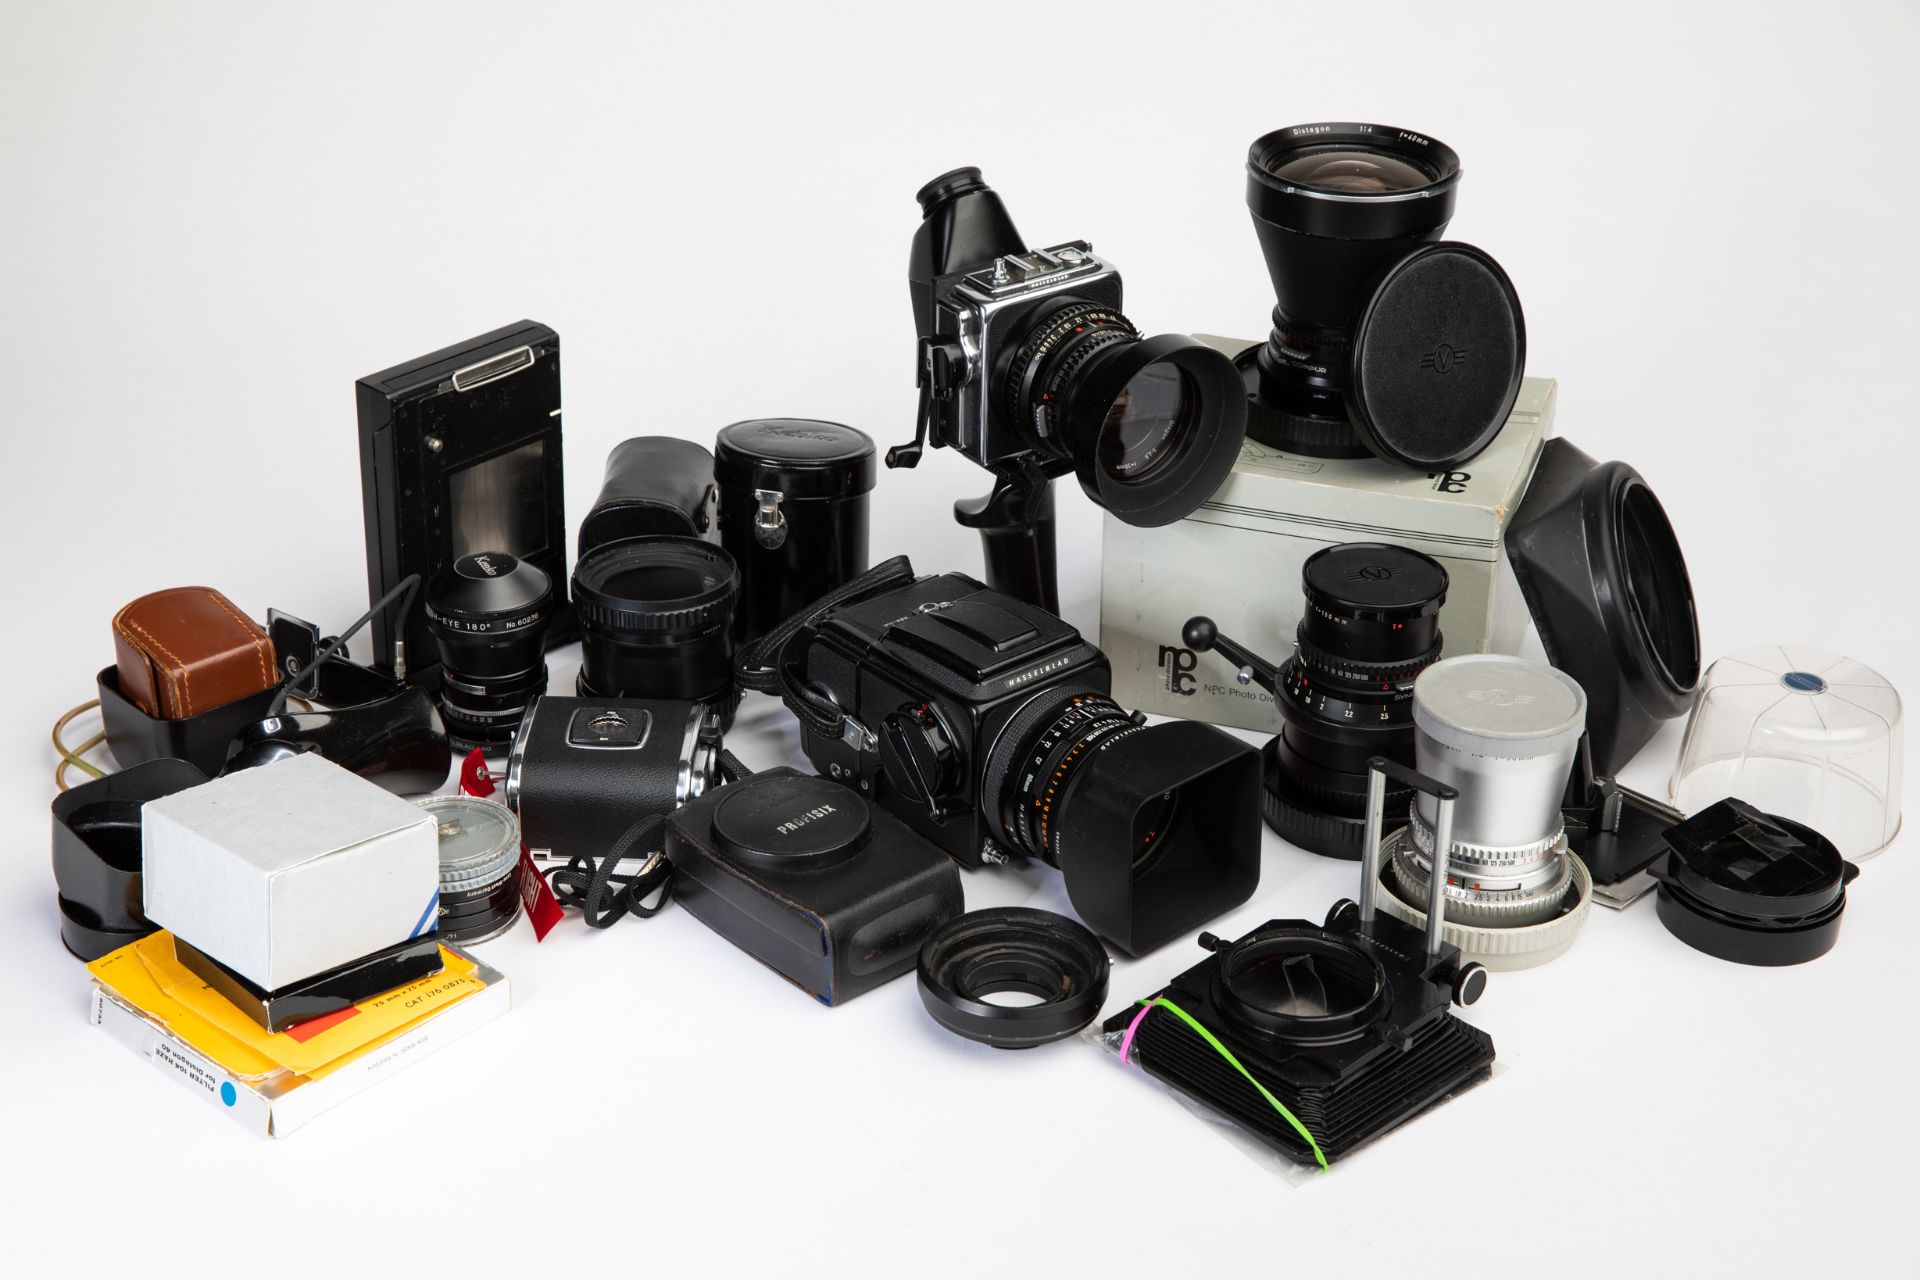 Hasselblad Cameras and Equipment, Mixed Lot - Image 2 of 5